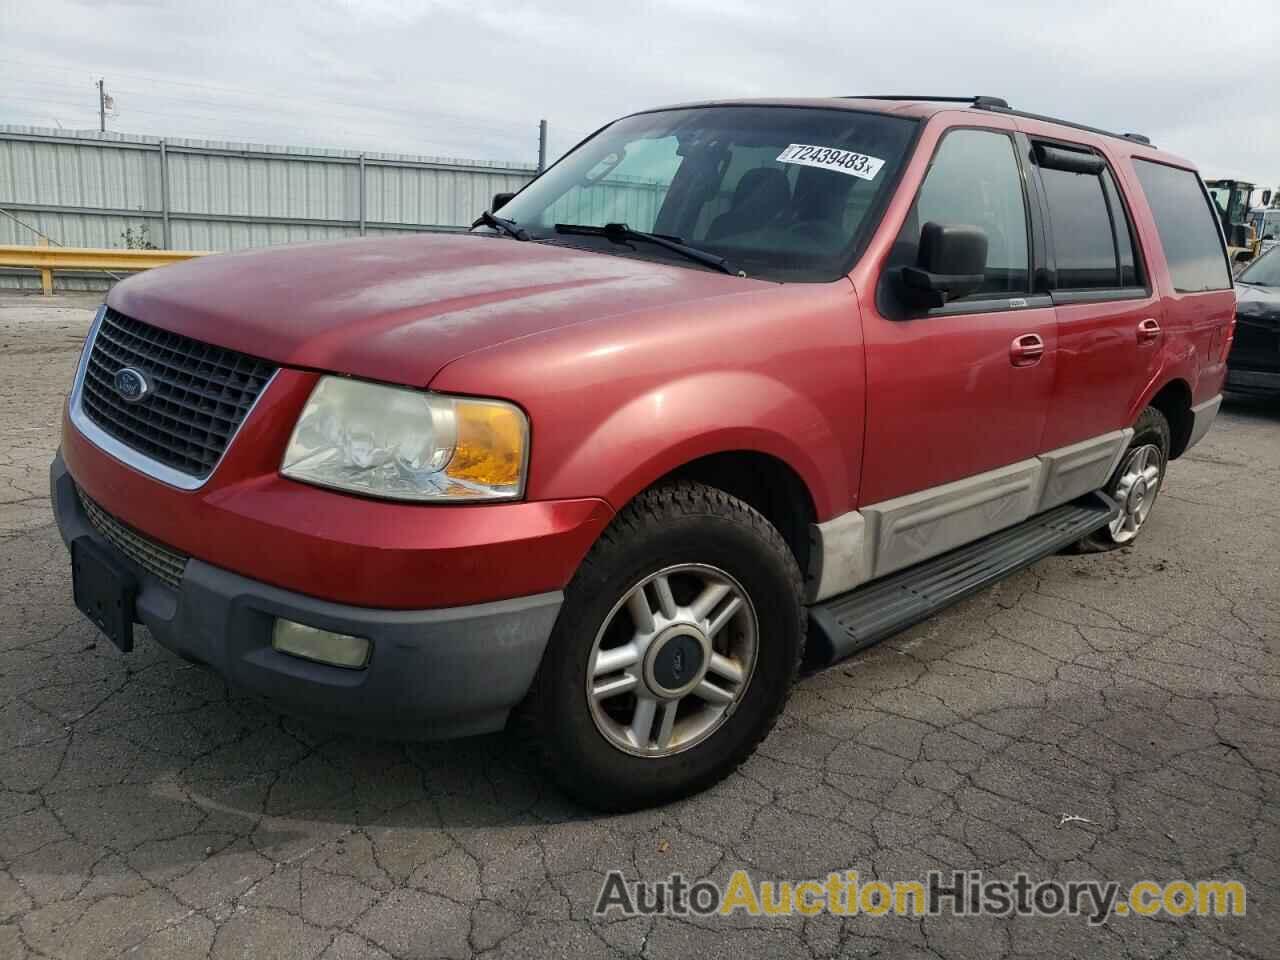 2003 FORD EXPEDITION XLT, 1FMRU15WX3LB52168